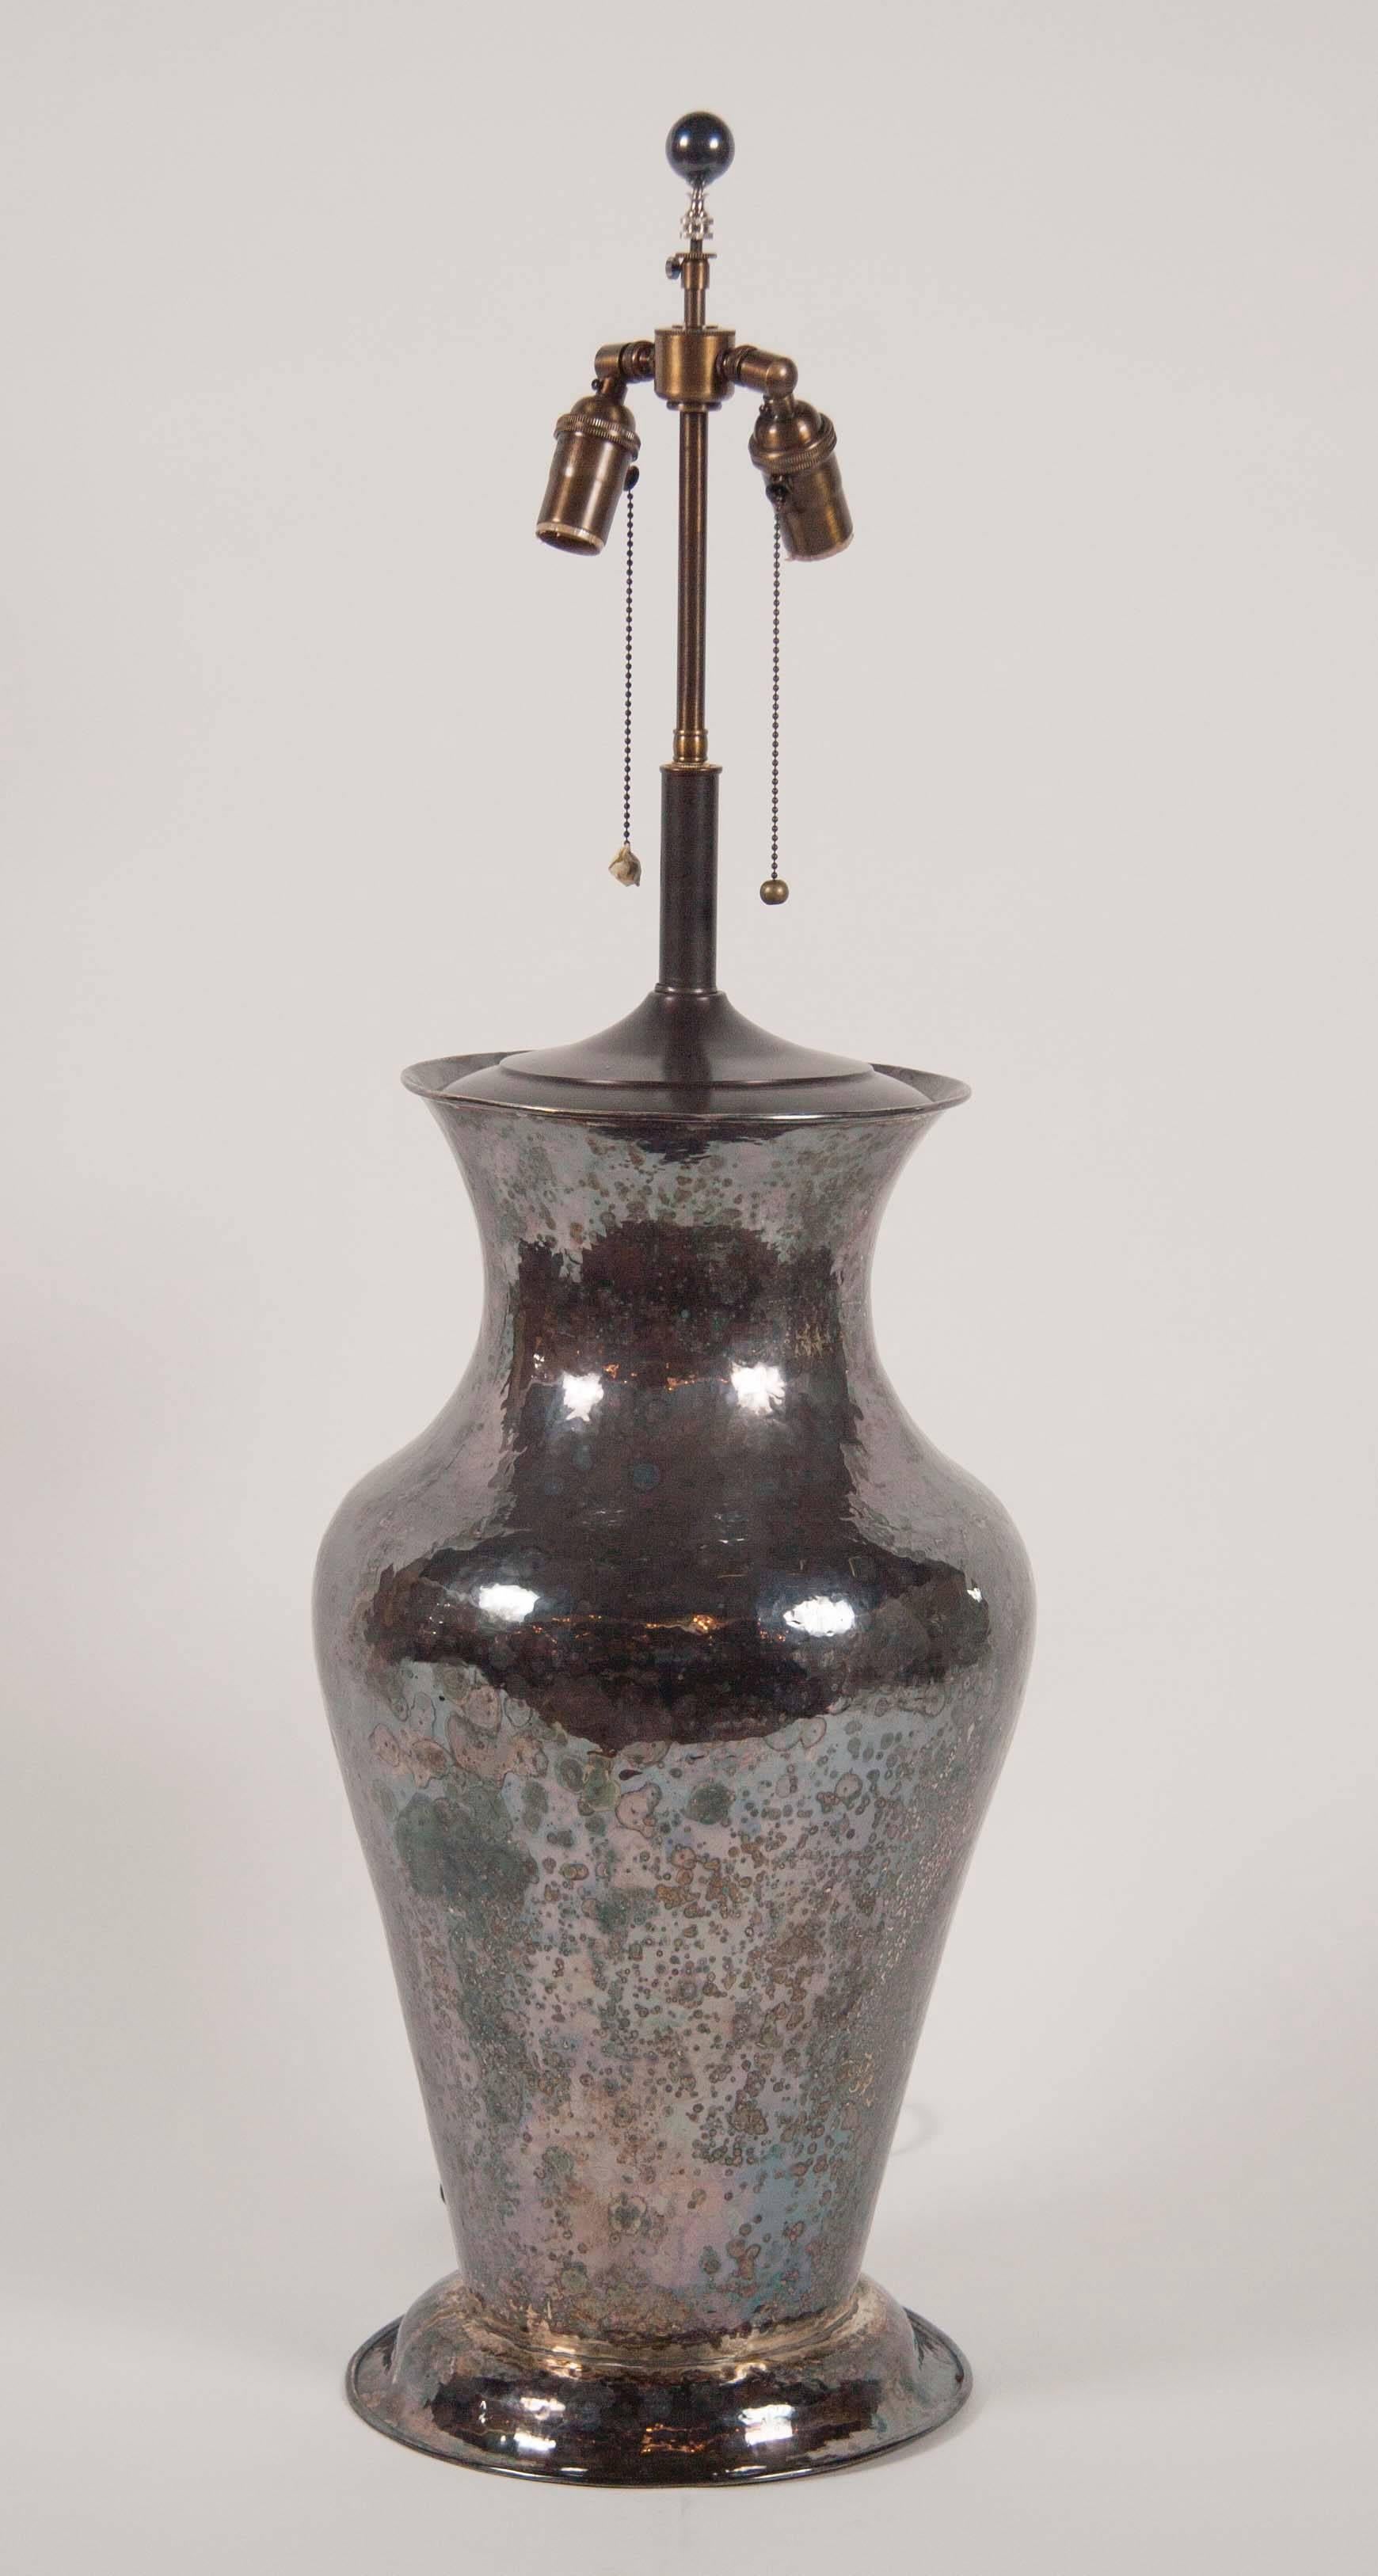 A handsome hammered silvered metal umbrella stand of now a lamp. Presumably American.
Measure: Height of stand: 23